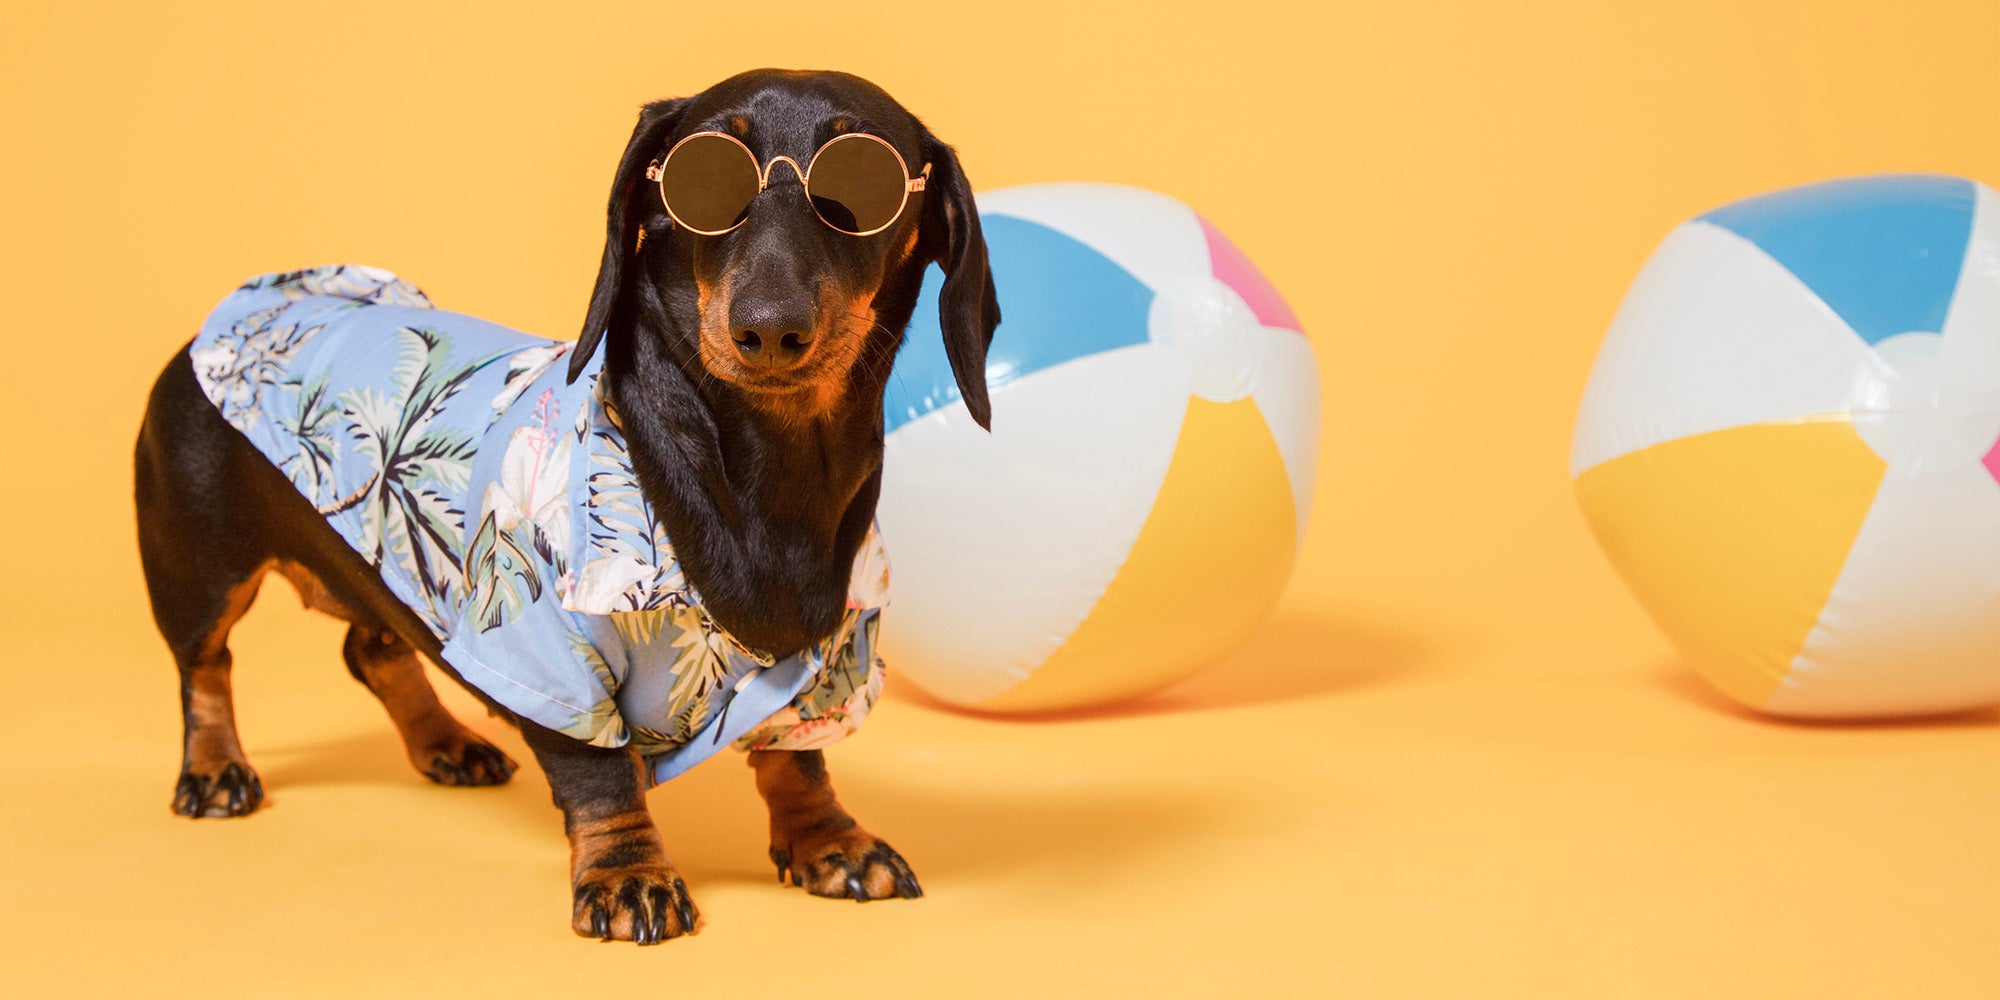 Dachshund dog in Hawaiian shirt and sunglasses on, with two blue, white and yellow beach balls, against an orange background